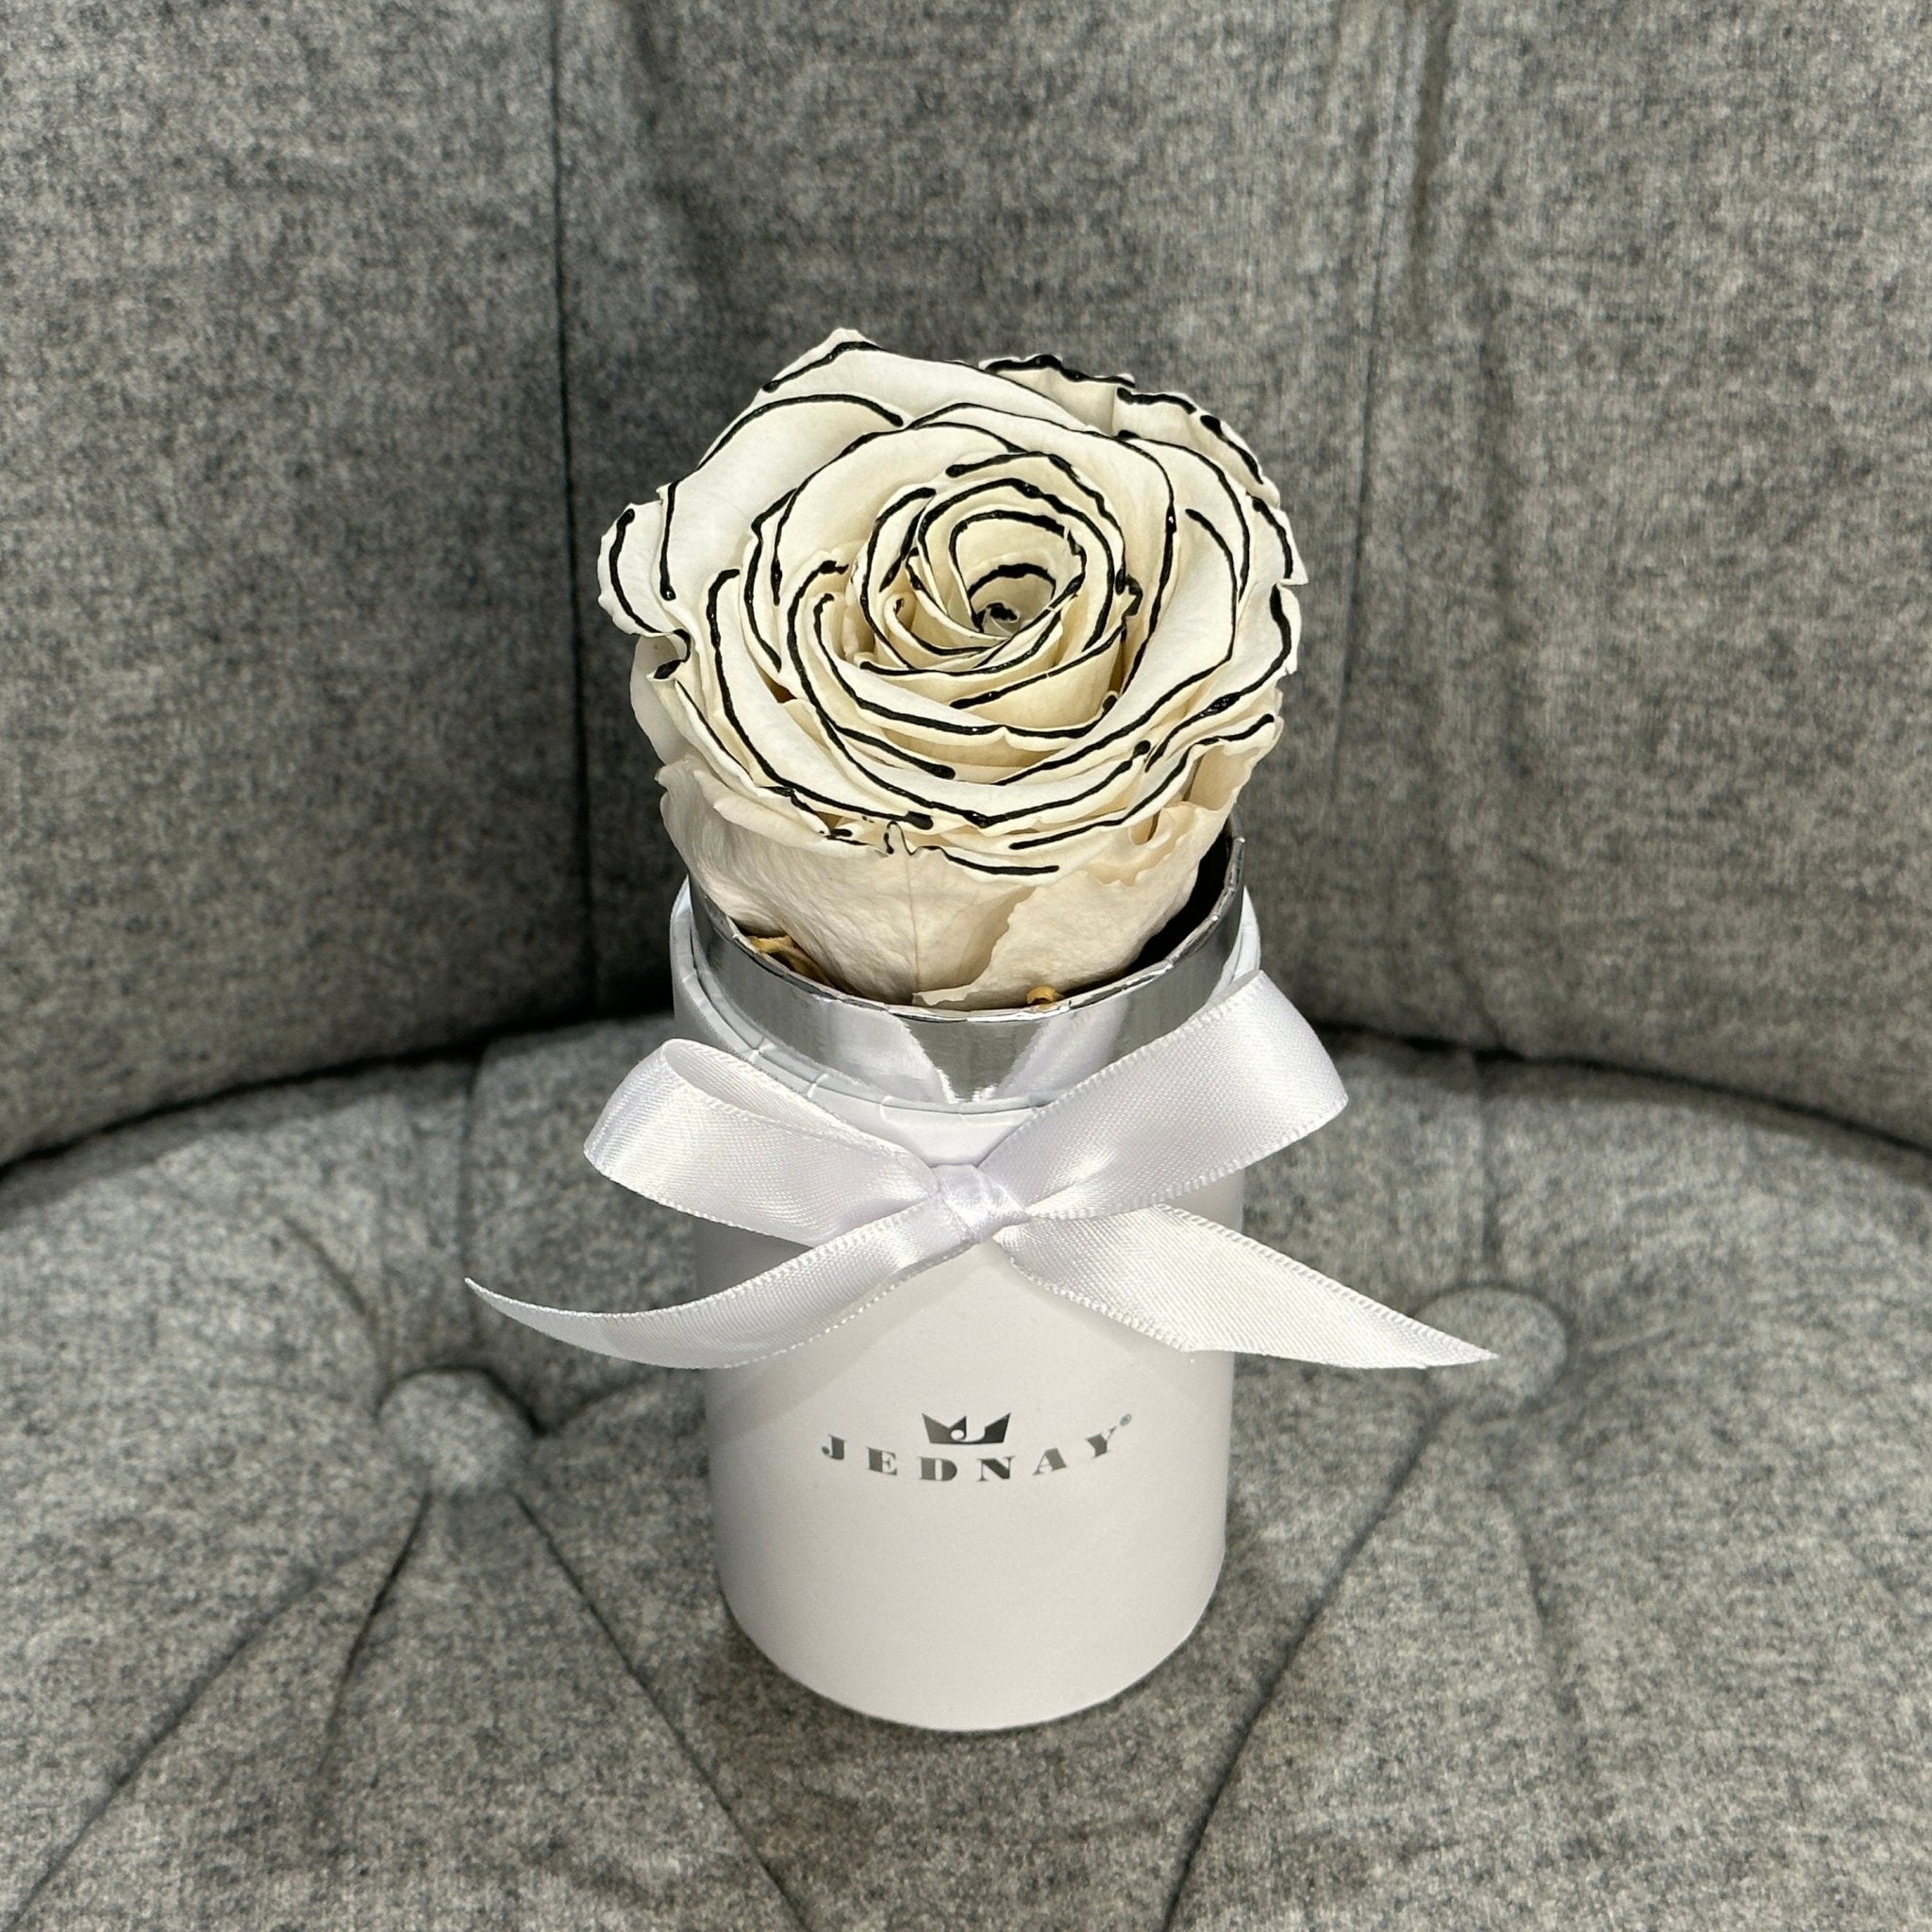 The Uno - Sketchy Eternal Rose - Classic White Box - Jednay Roses